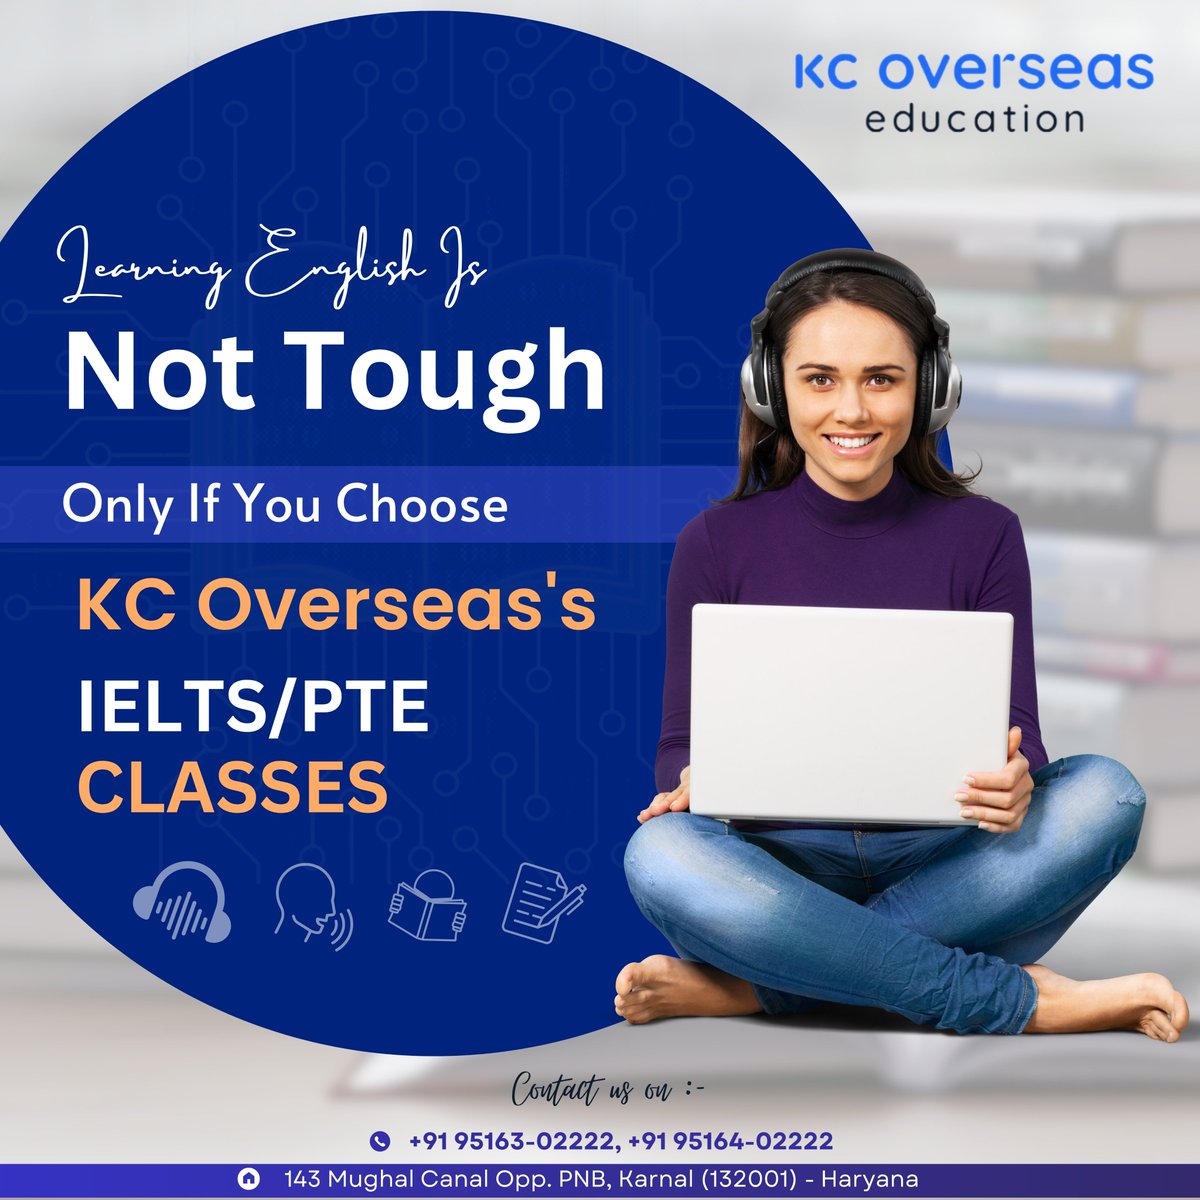 'Elevate Your English Proficiency with KC Overseas! 📖🌐 Join Our IELTS/PTE Classes for a Language Journey like Never Before. ✨ #EnglishMastery #KCOverseasLearning #ielts #ieltspreparation #pte #pearsontestofenglish #kcoverseas '